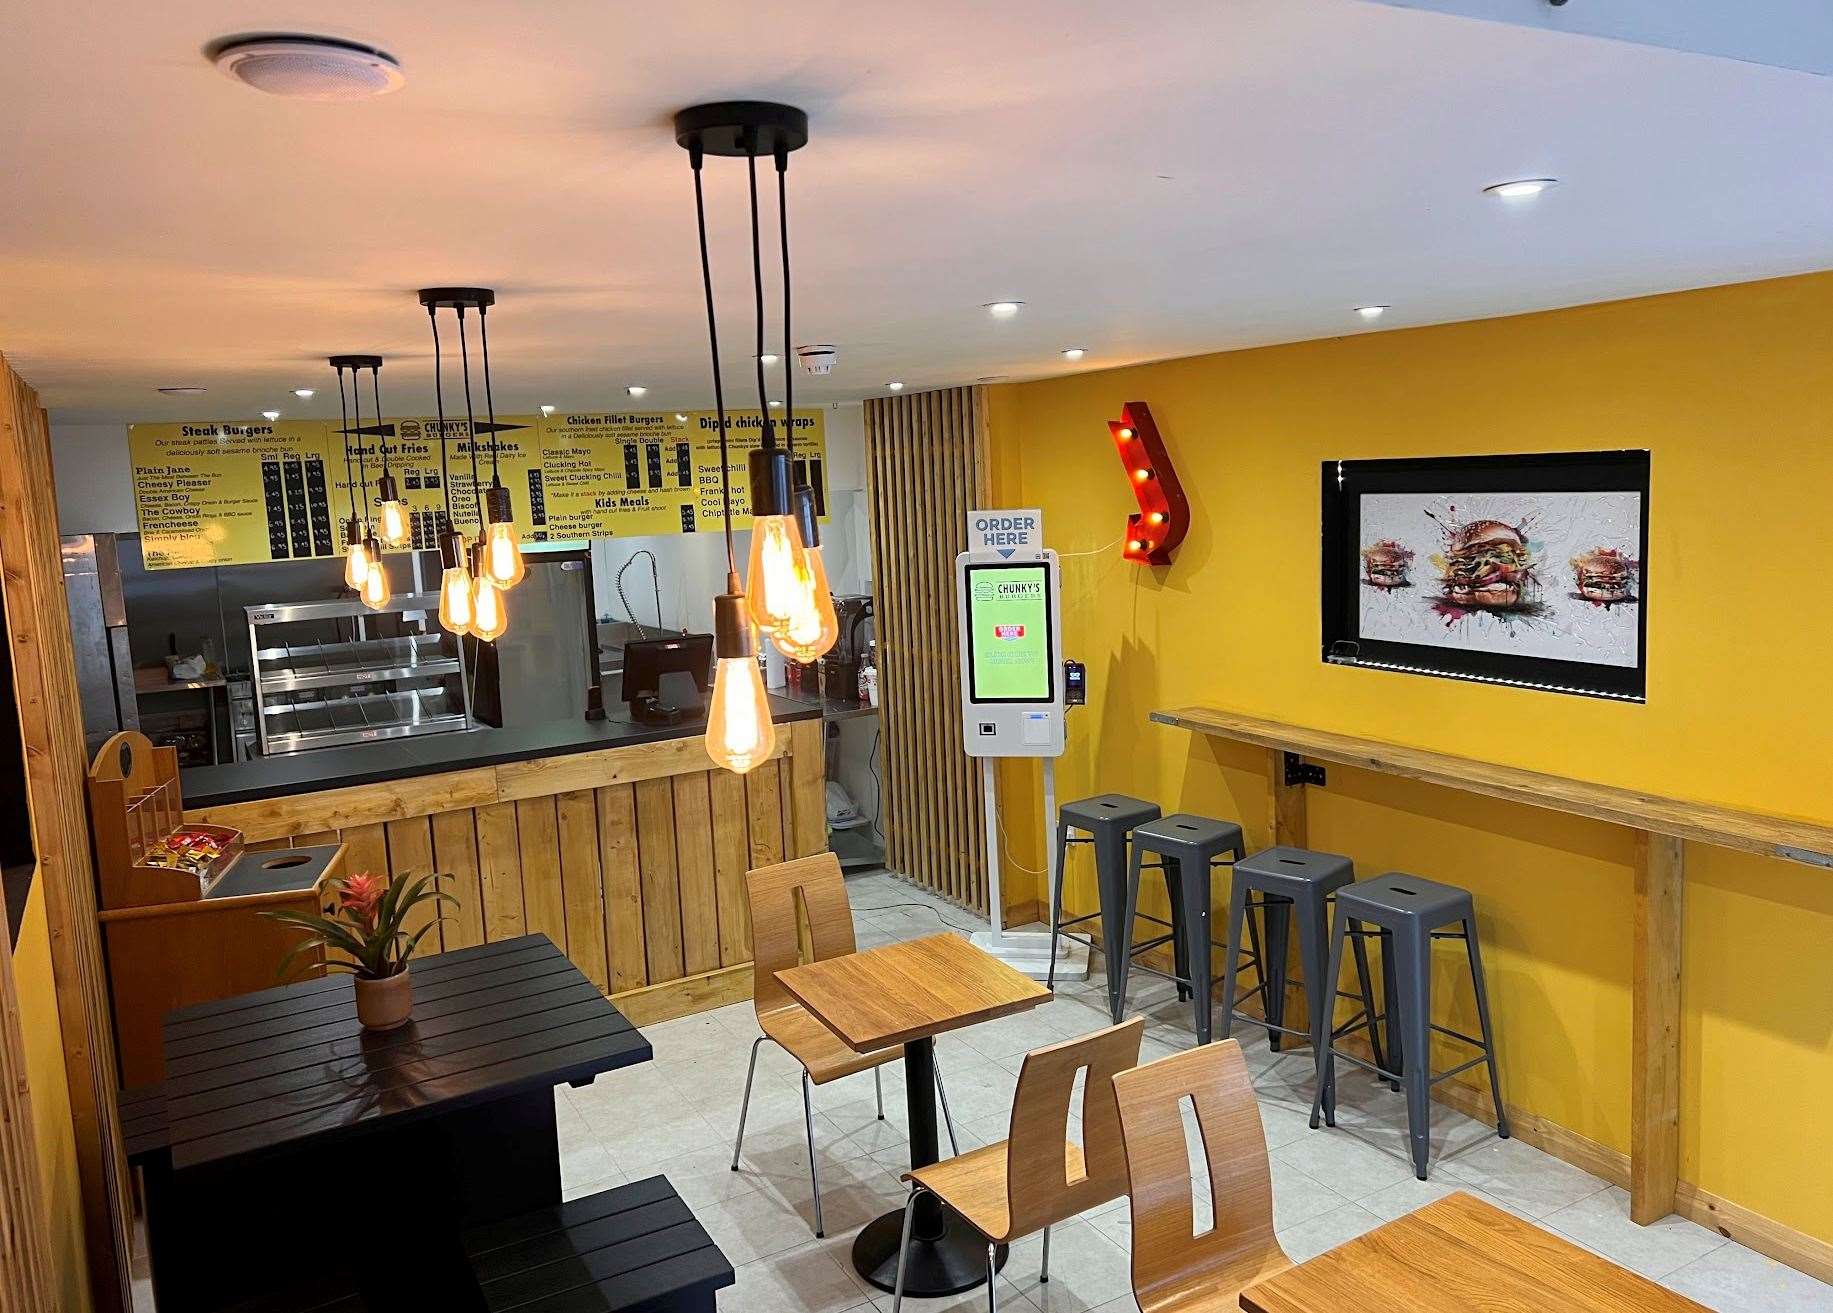 The new fast-food restaurant sells burgers, fries, milkshakes and more. Picture: Sam Remblance